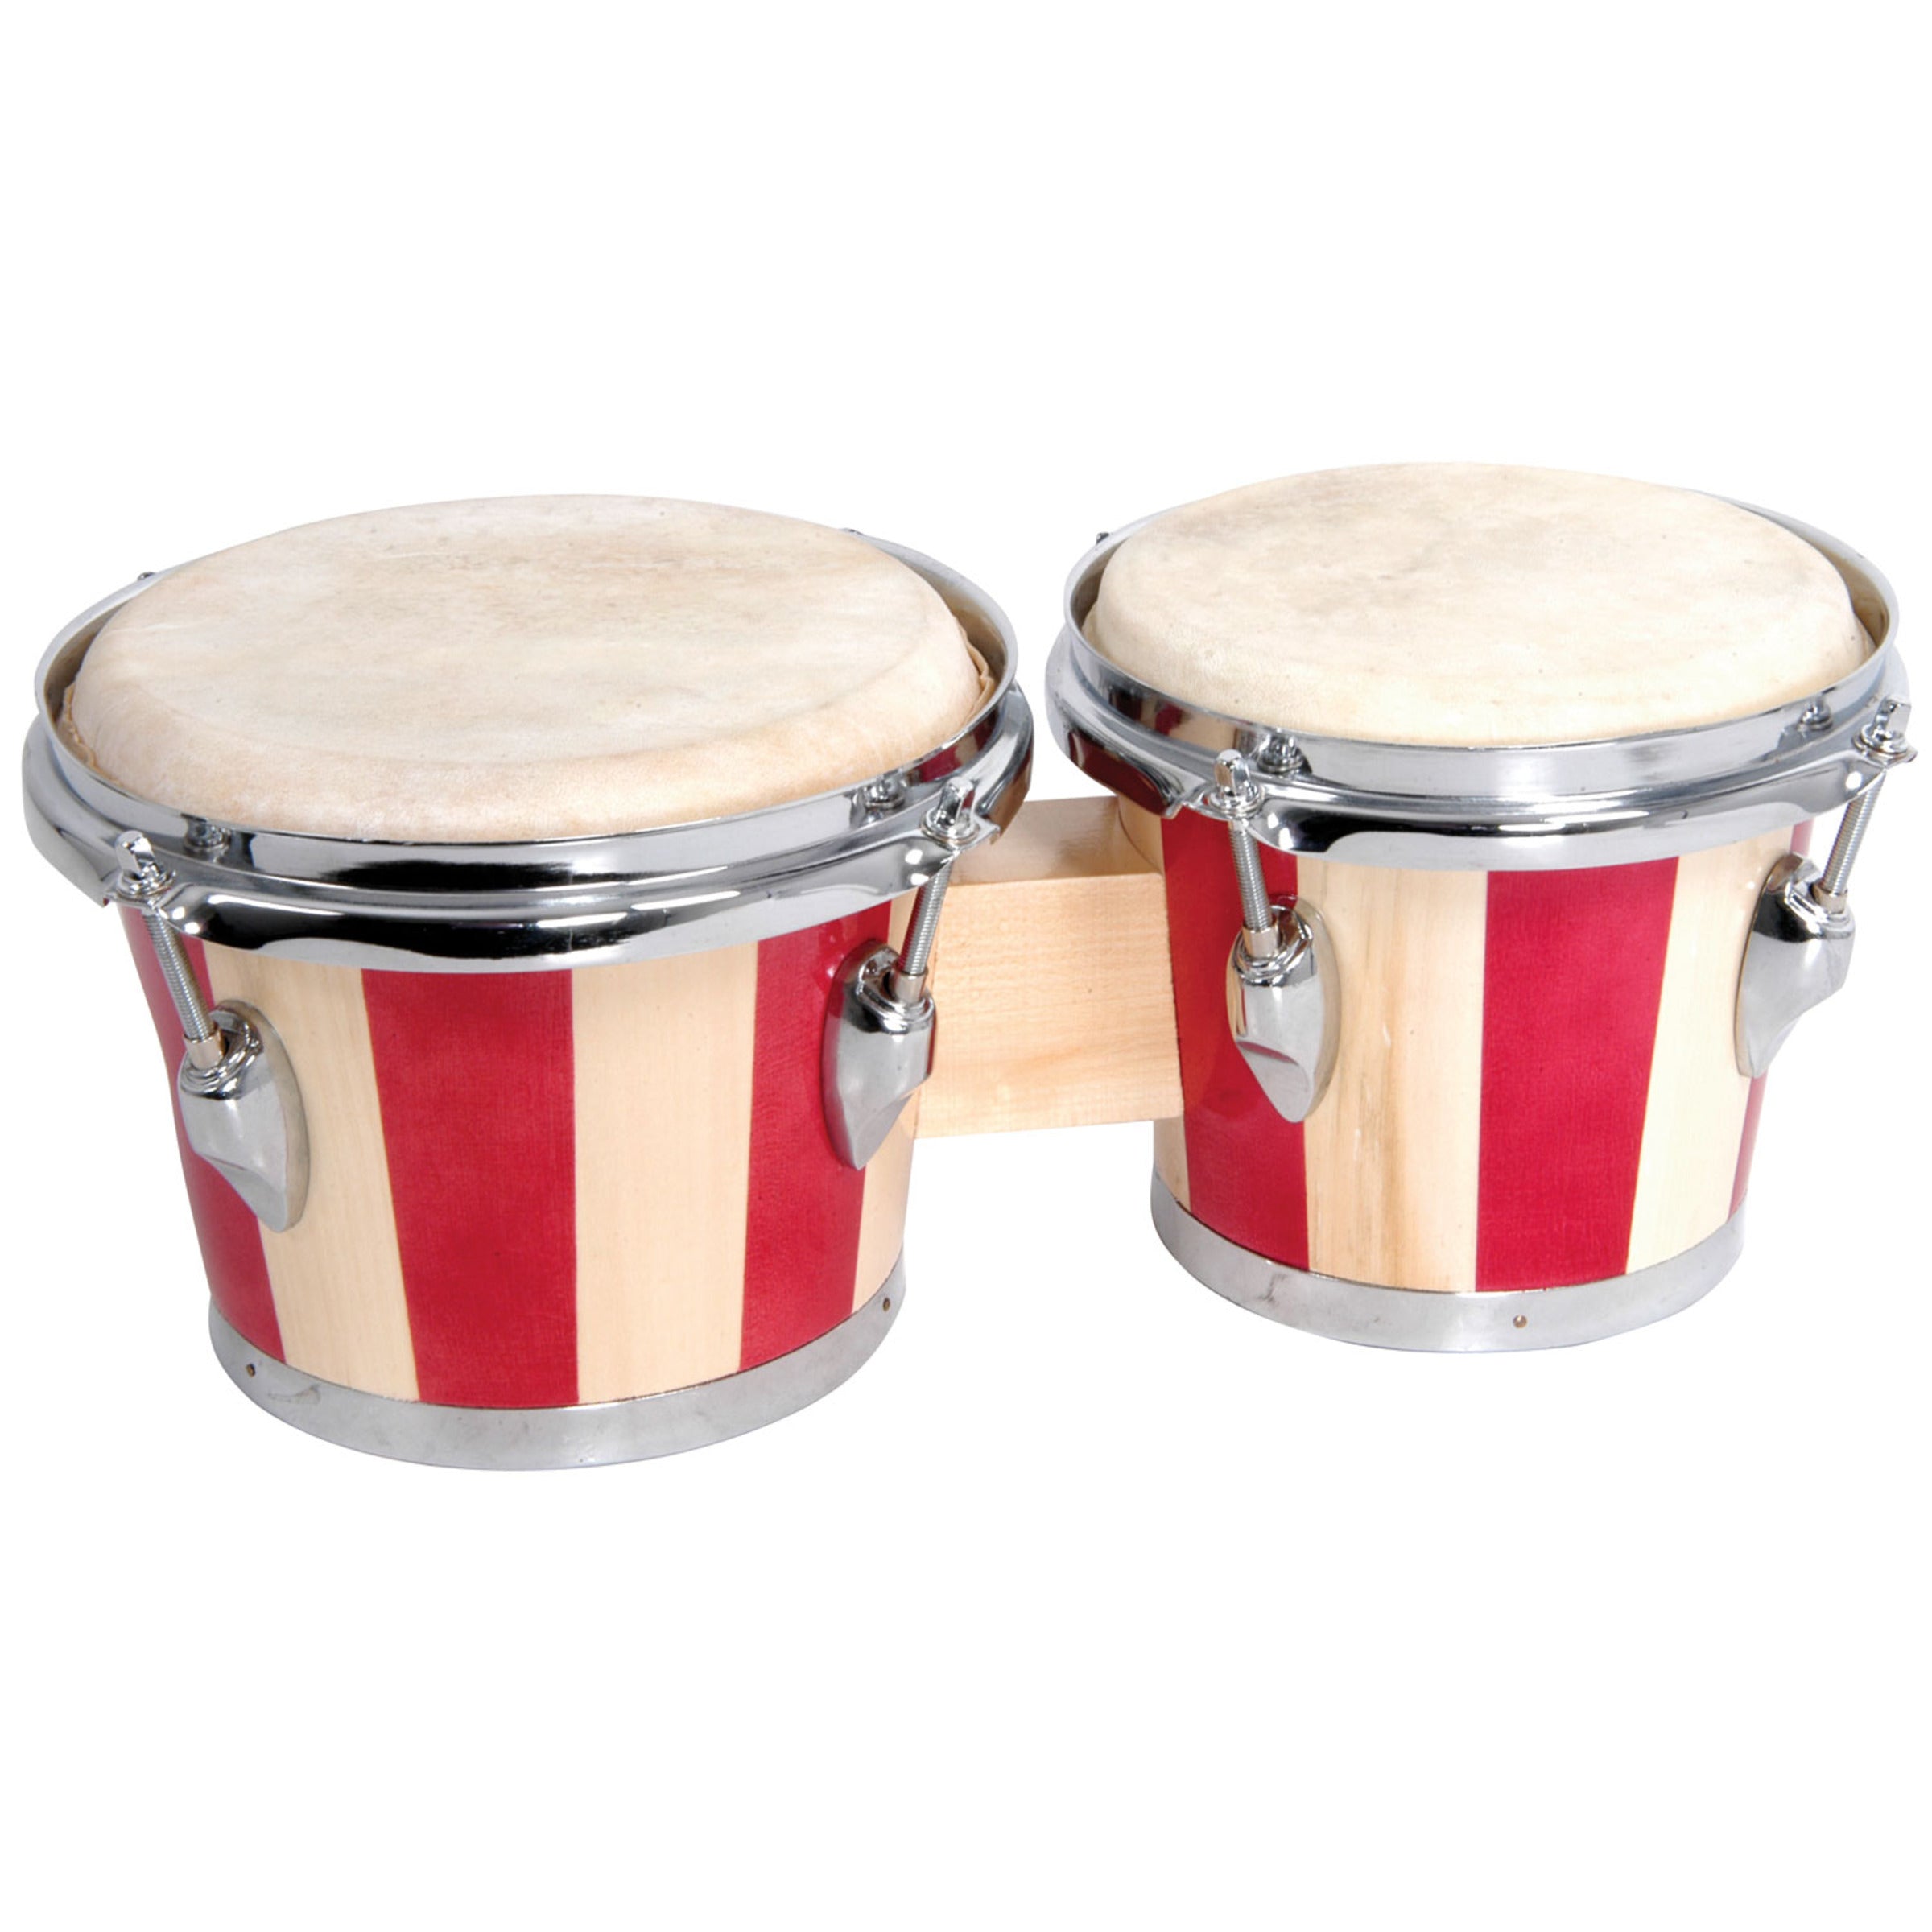 BONGO - RED & NATURAL - SONOR